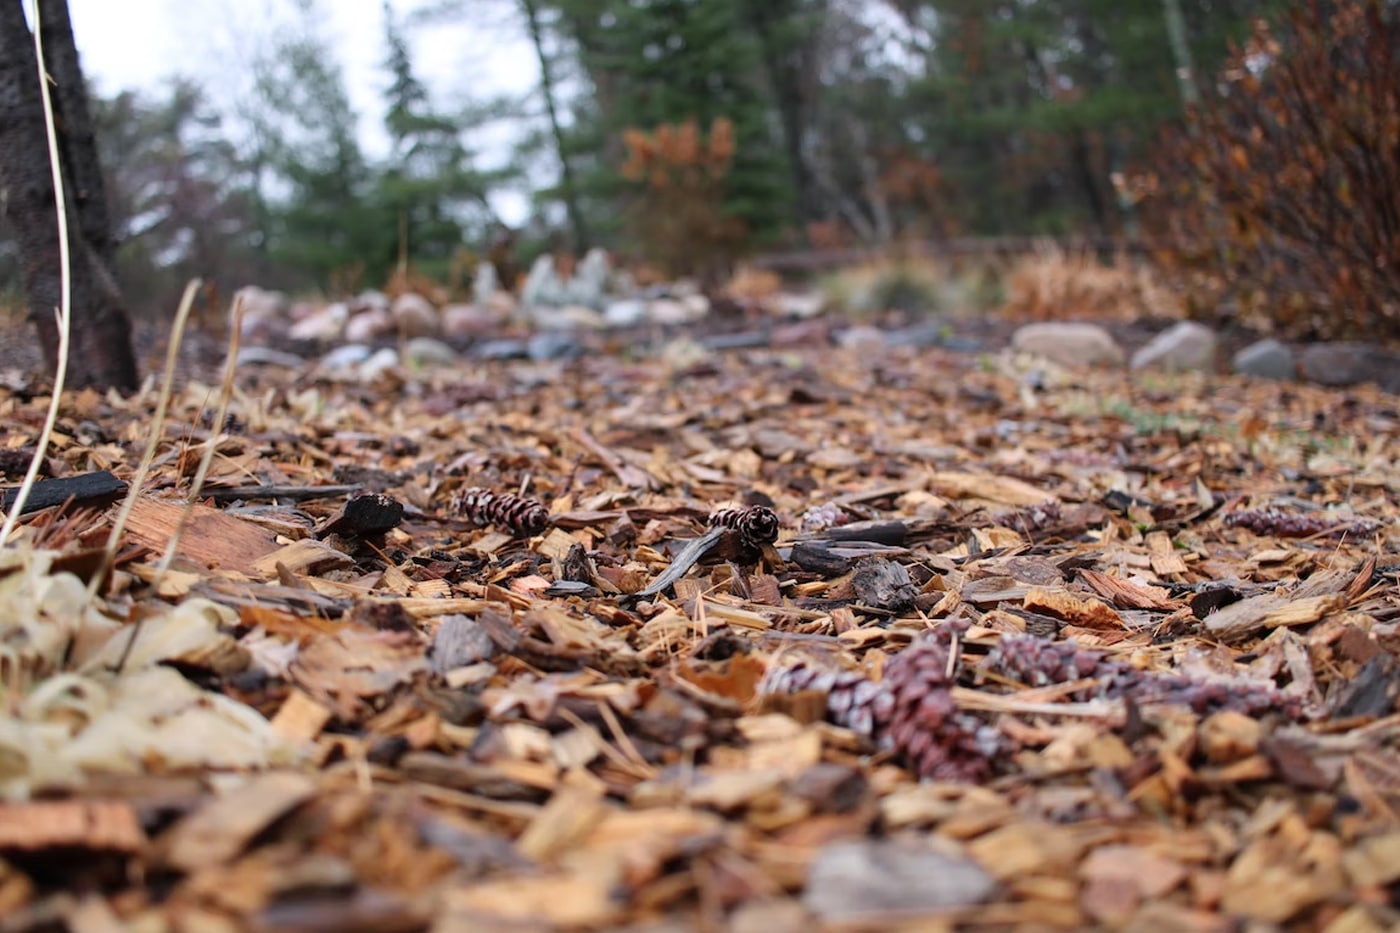 Mulching 101: How To Determine the Amount of Mulch You Need